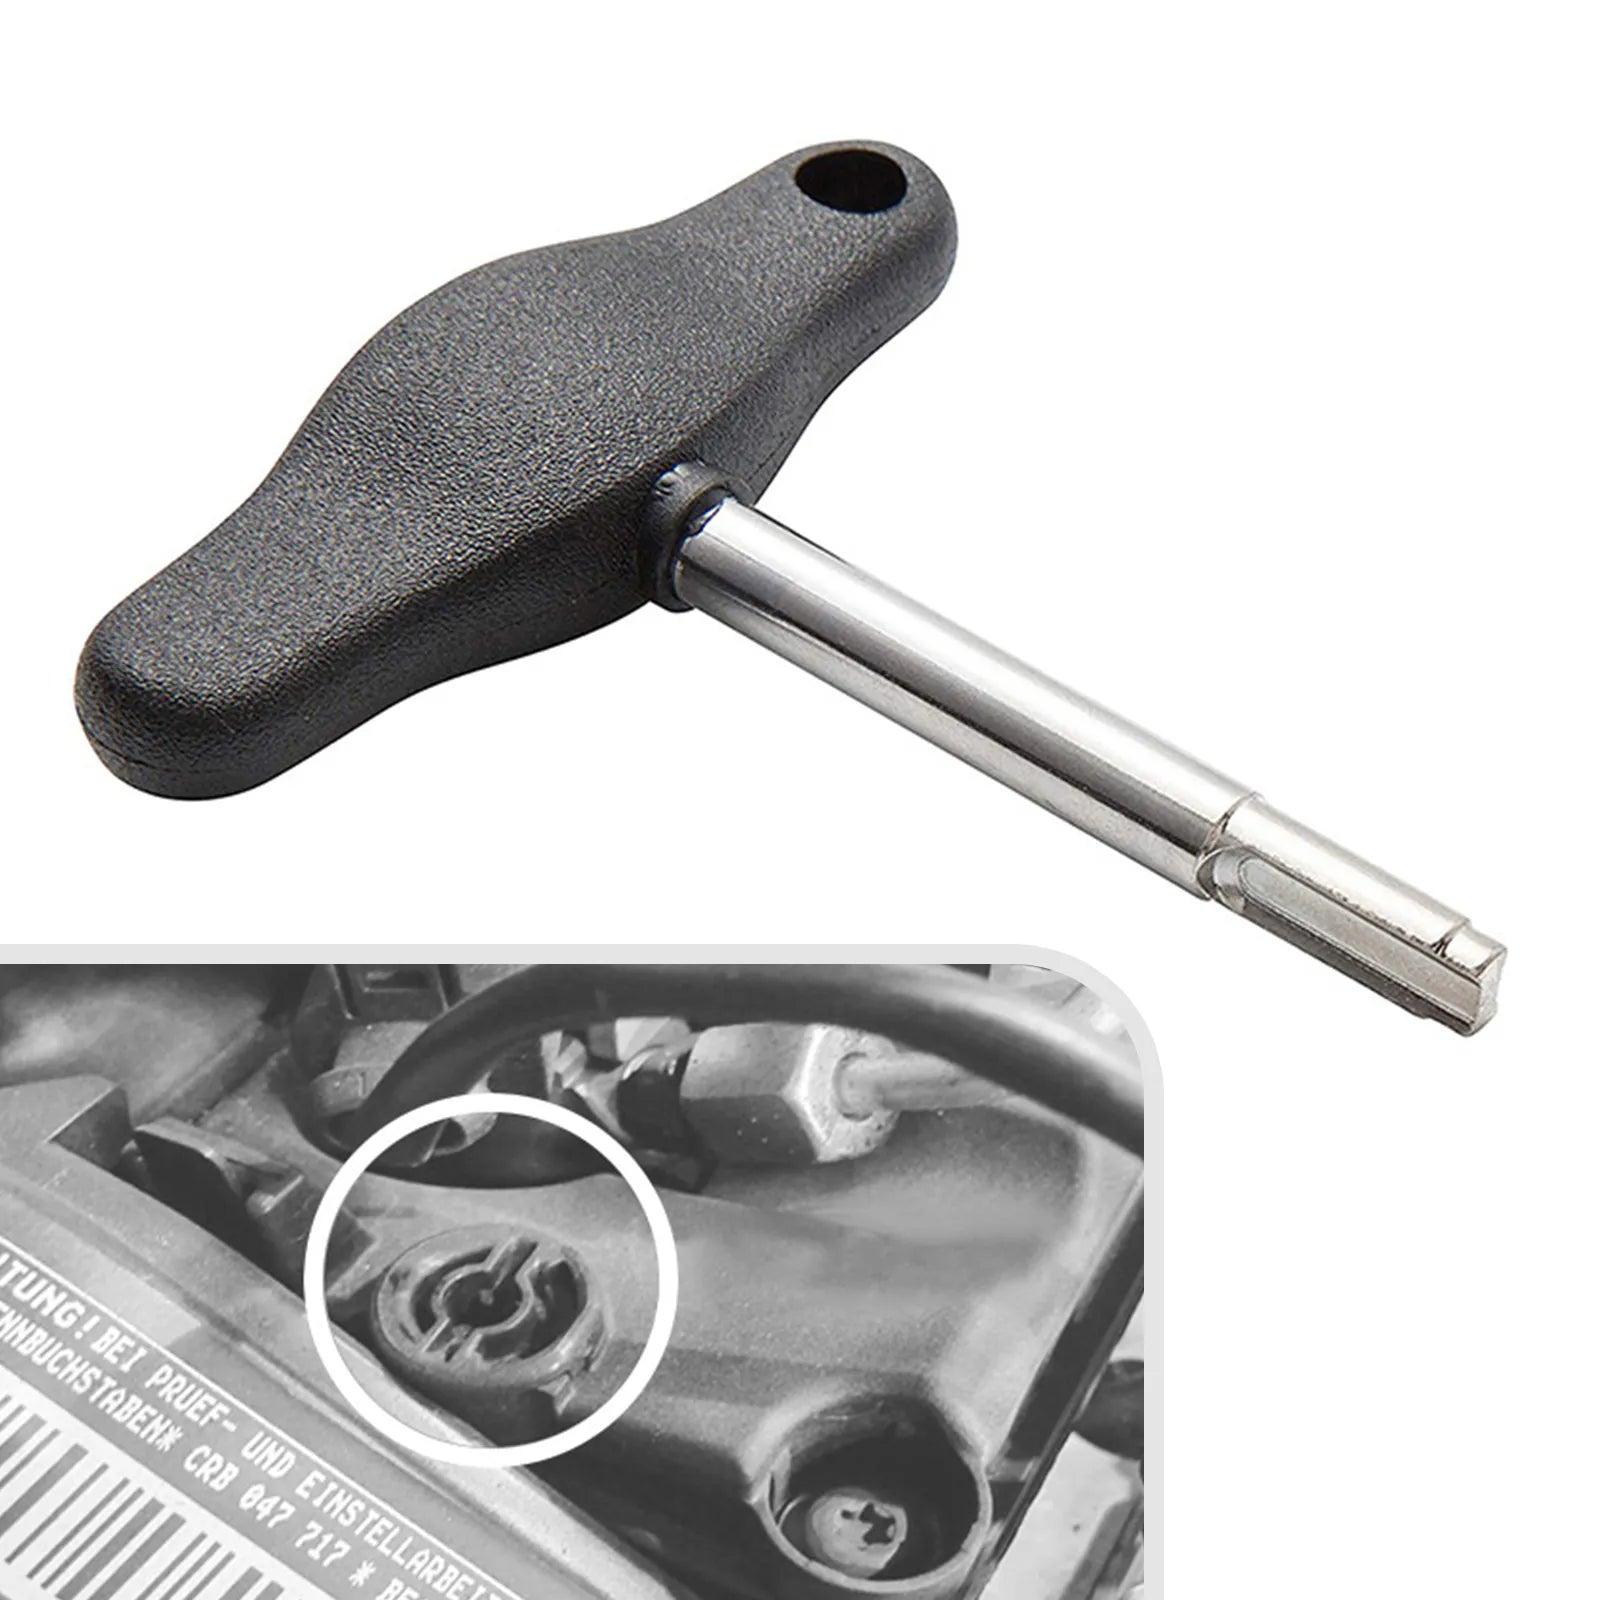 Plastic Oil Drain Plug Screw Removal Installer Wrench Assembly Tool Wrench Tool Car Repair Tool for VAG for VW For Audi